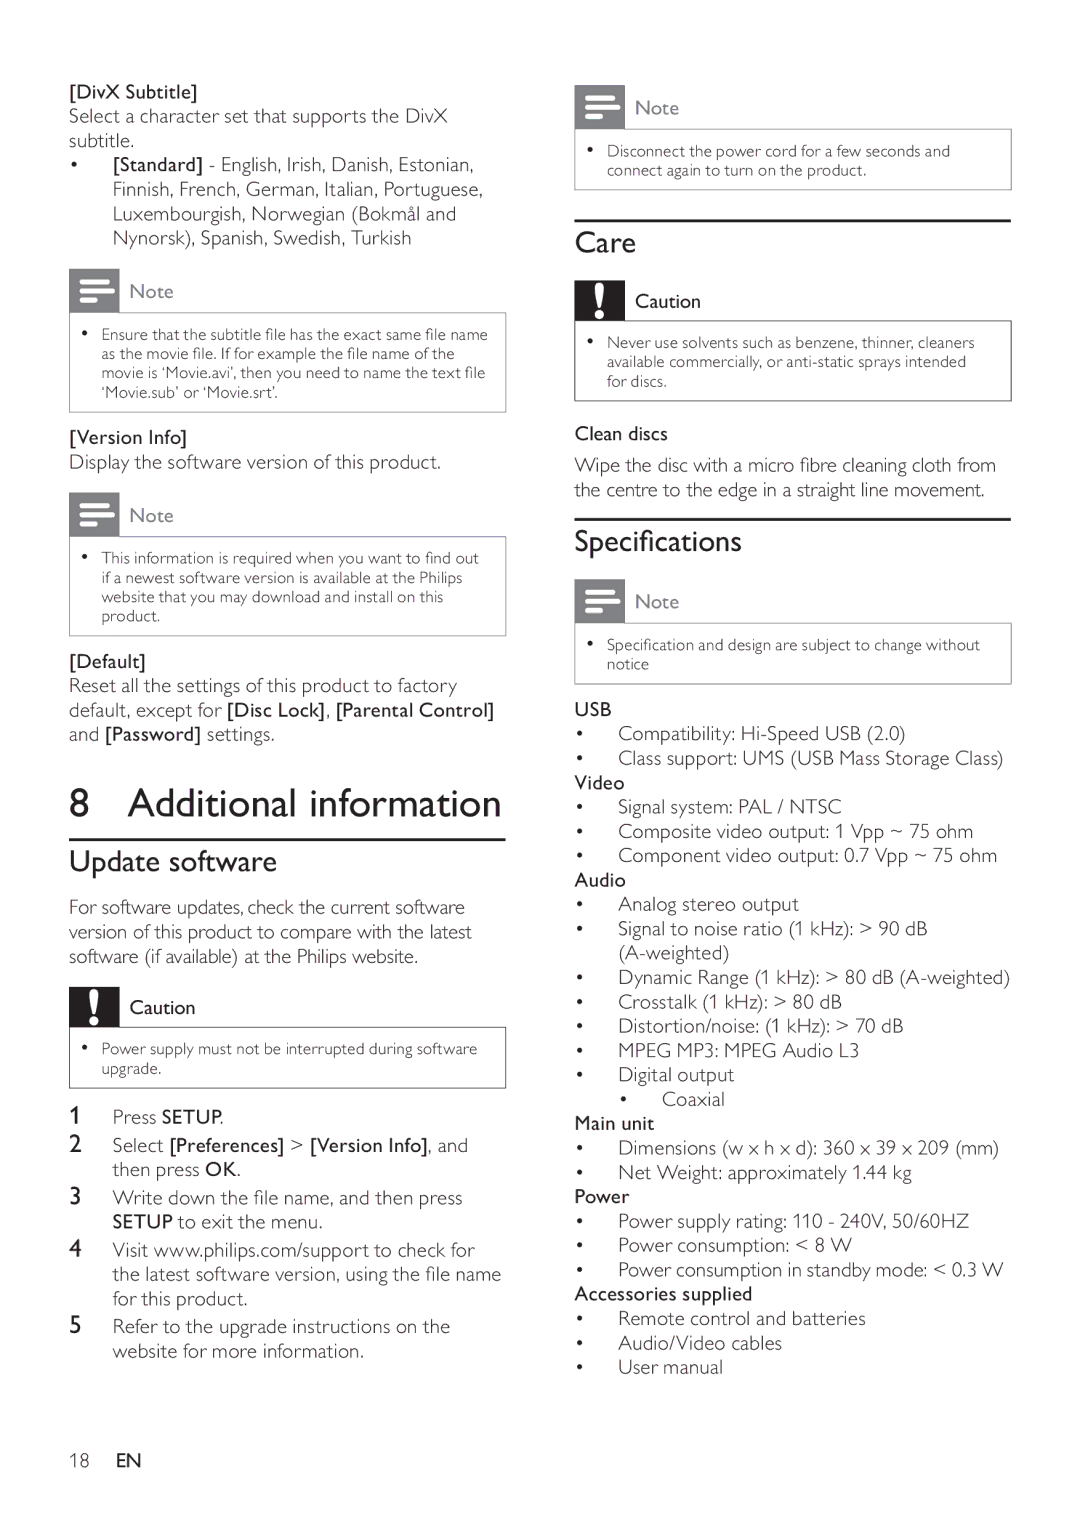 Philips DVP3550KX/77 user manual Additional information, Update software, Care, Speciﬁcations, Usb 